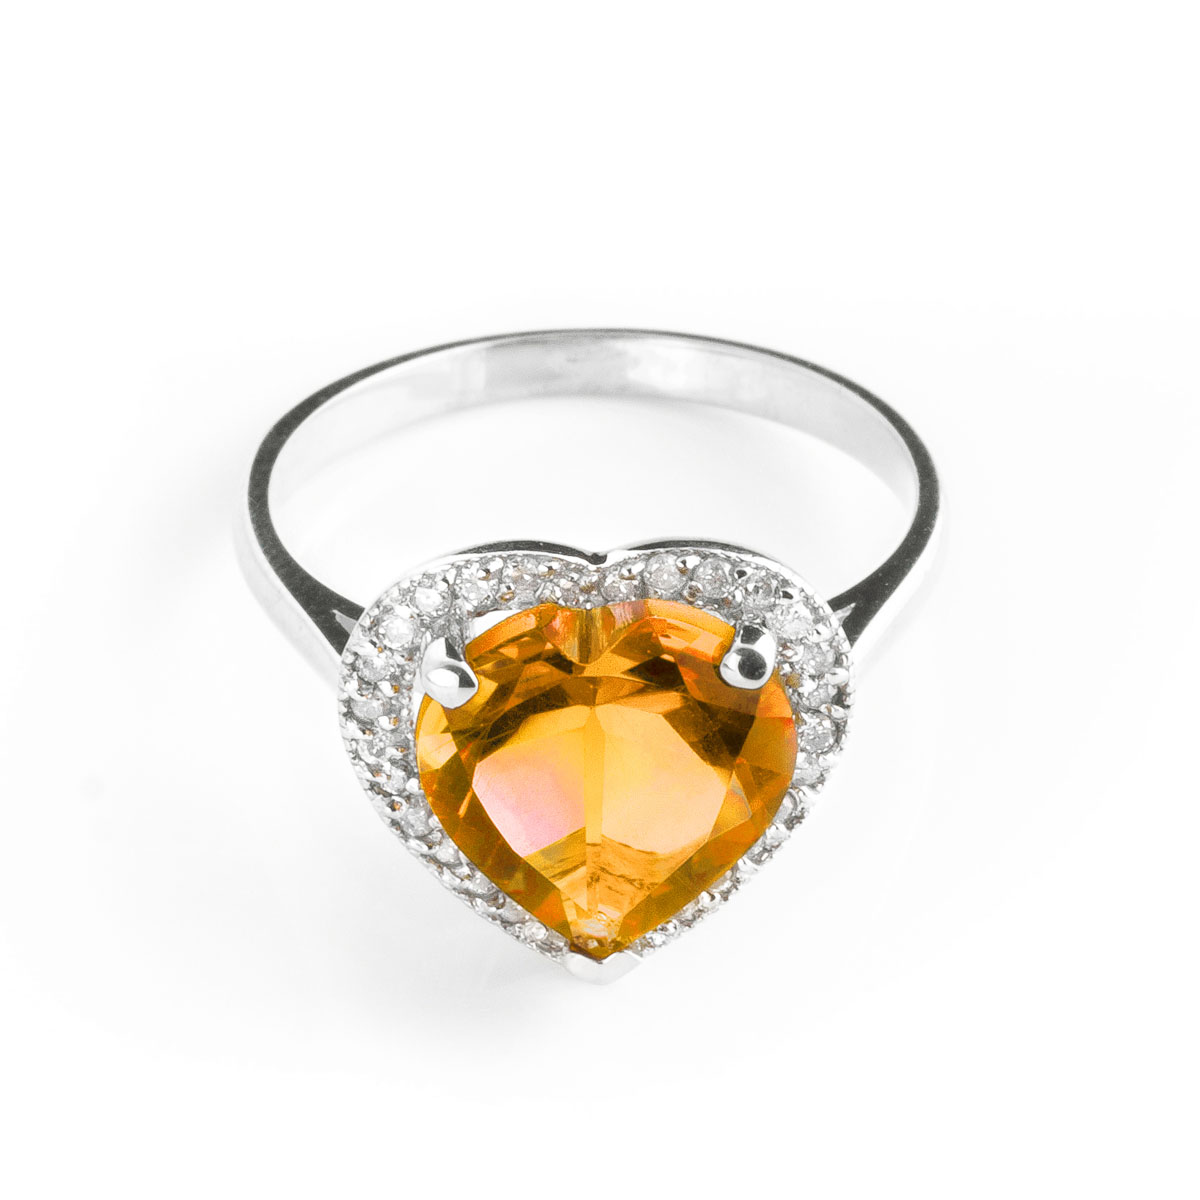 Citrine Halo Ring 3.24 ctw in 18ct White Gold